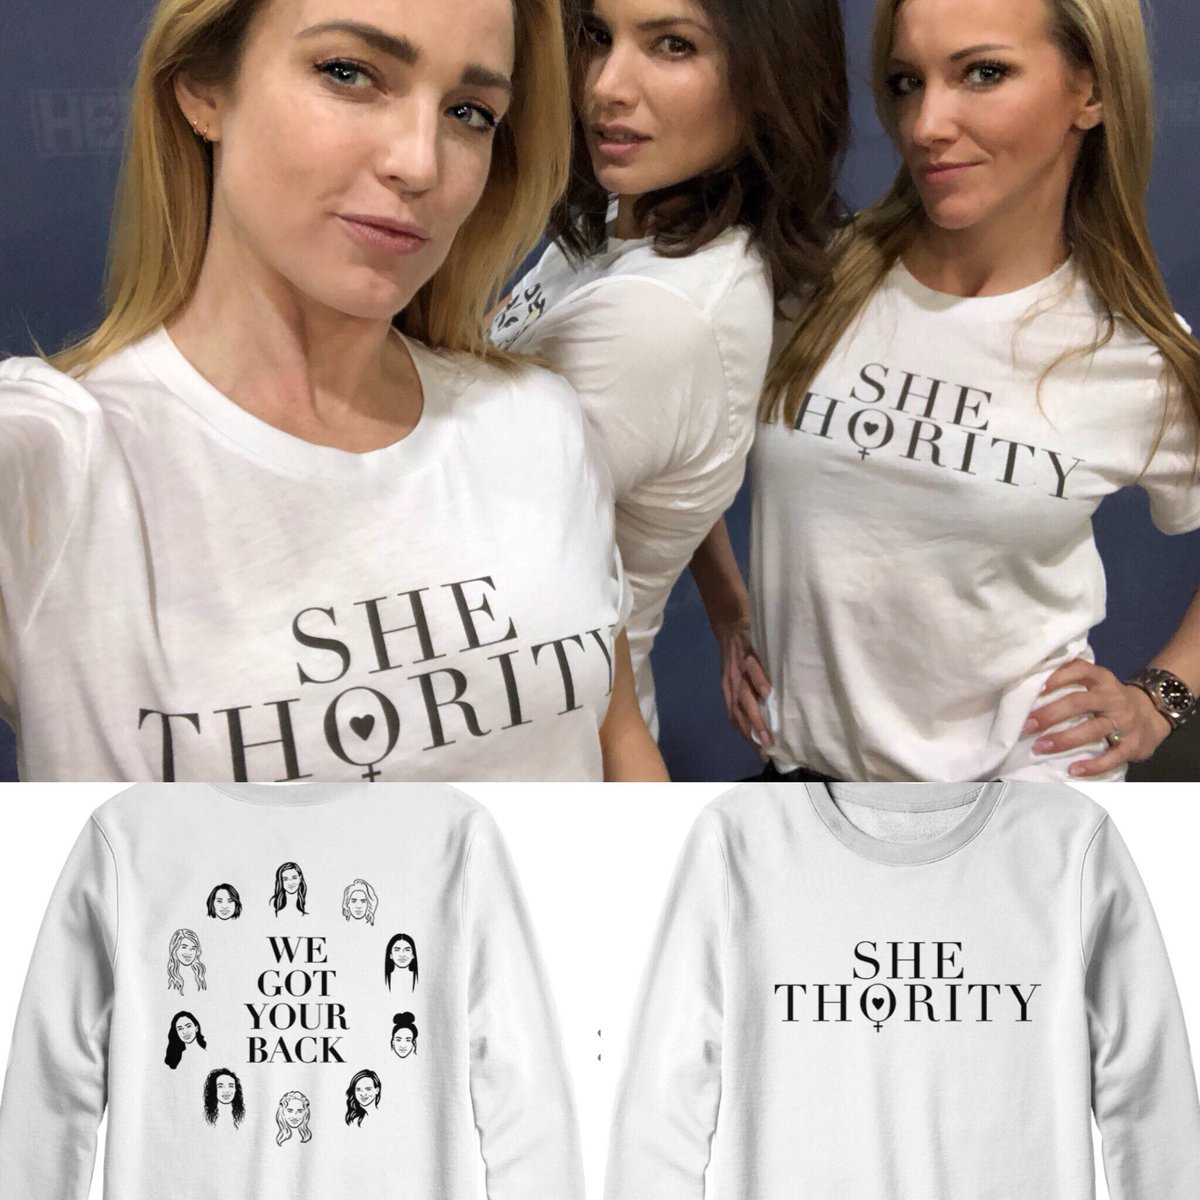 GIVEAWAY! 🙌 Retweet for your chance to win a #shethority shirt we’ll pick 5 ppl tomorrow! #wegotyourback 💖